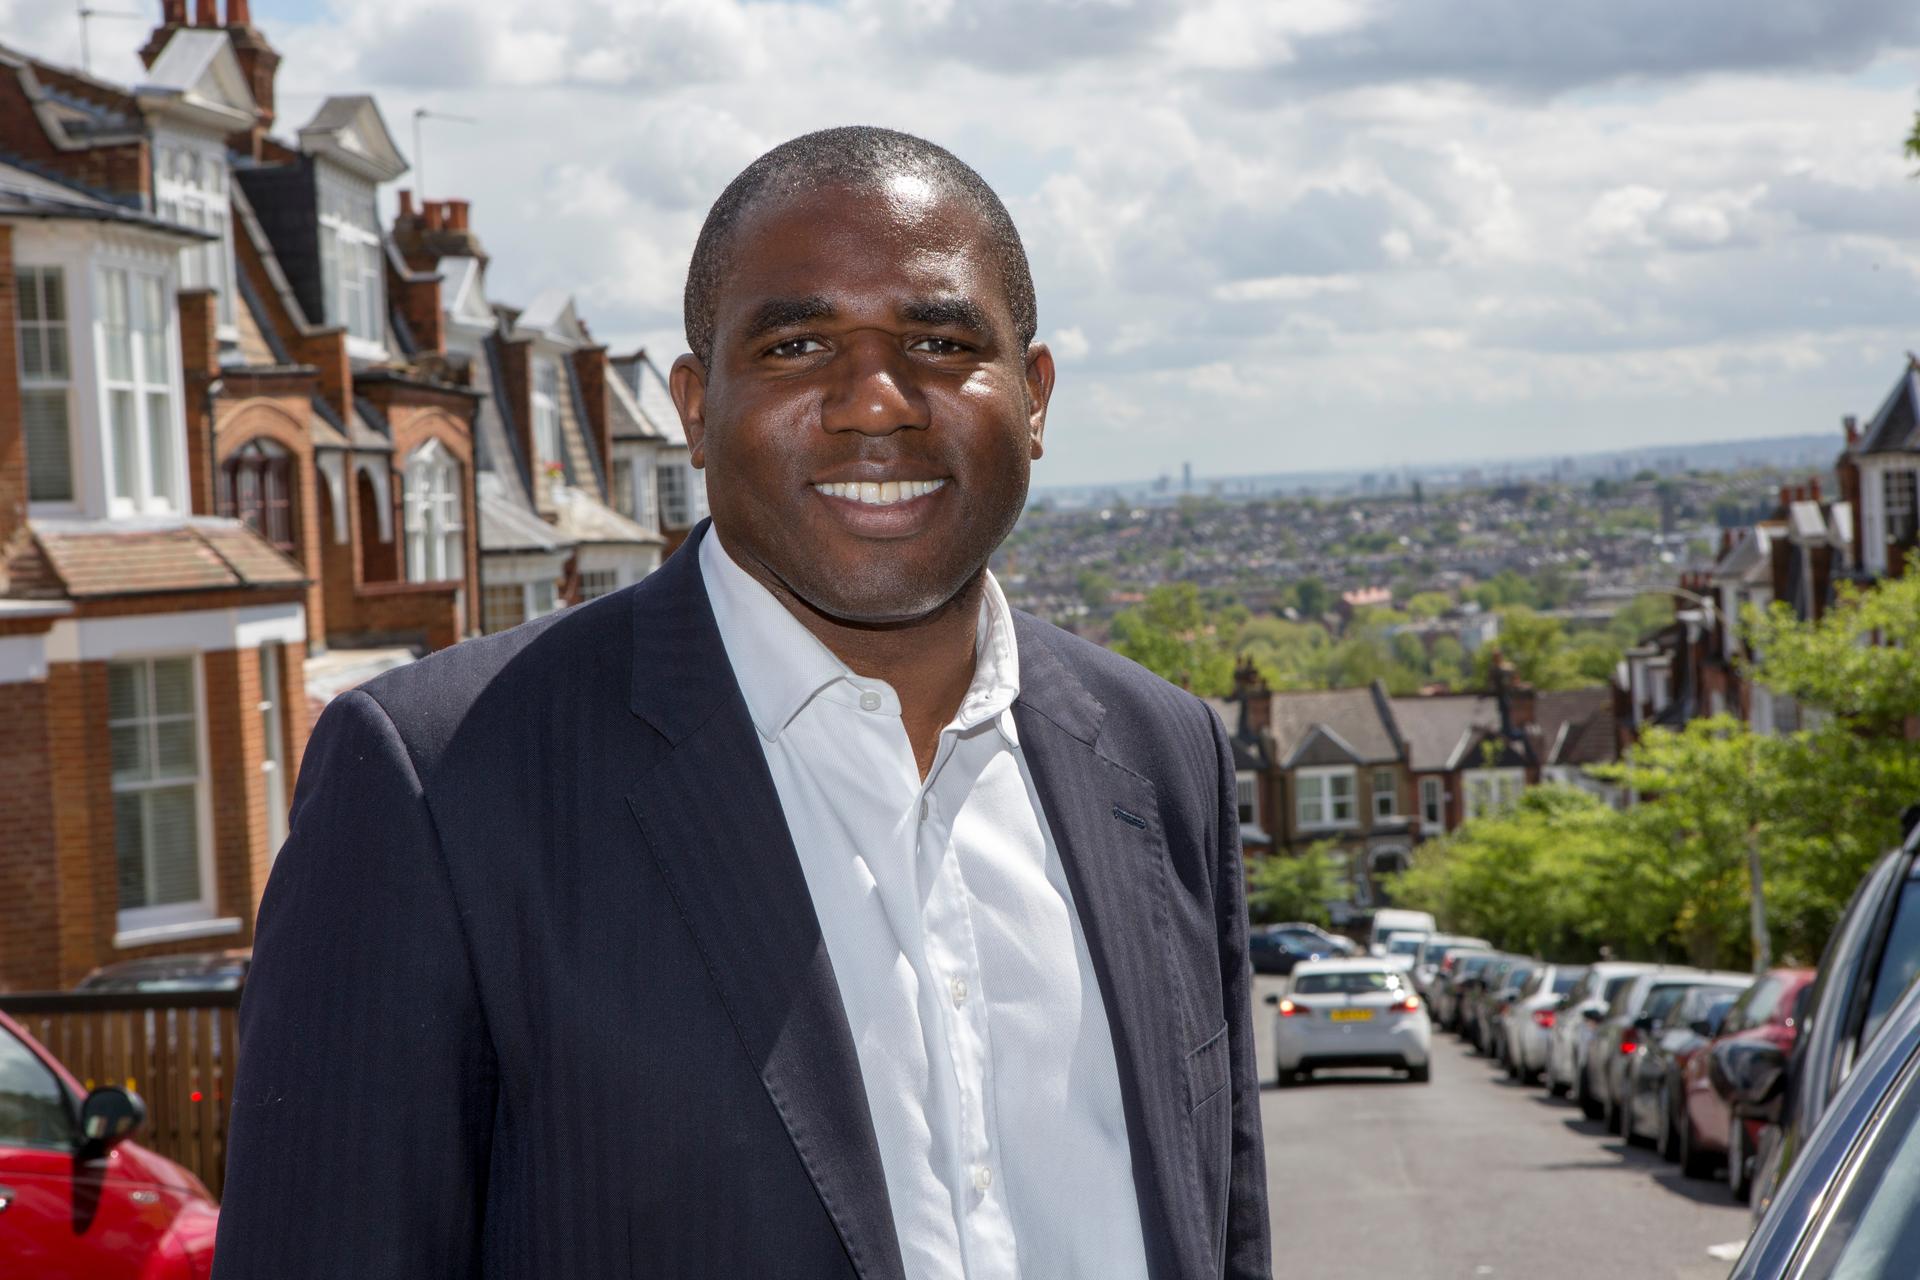 MP David Lammy poses outdoors for a photo wearing a dark suit and white button shirt